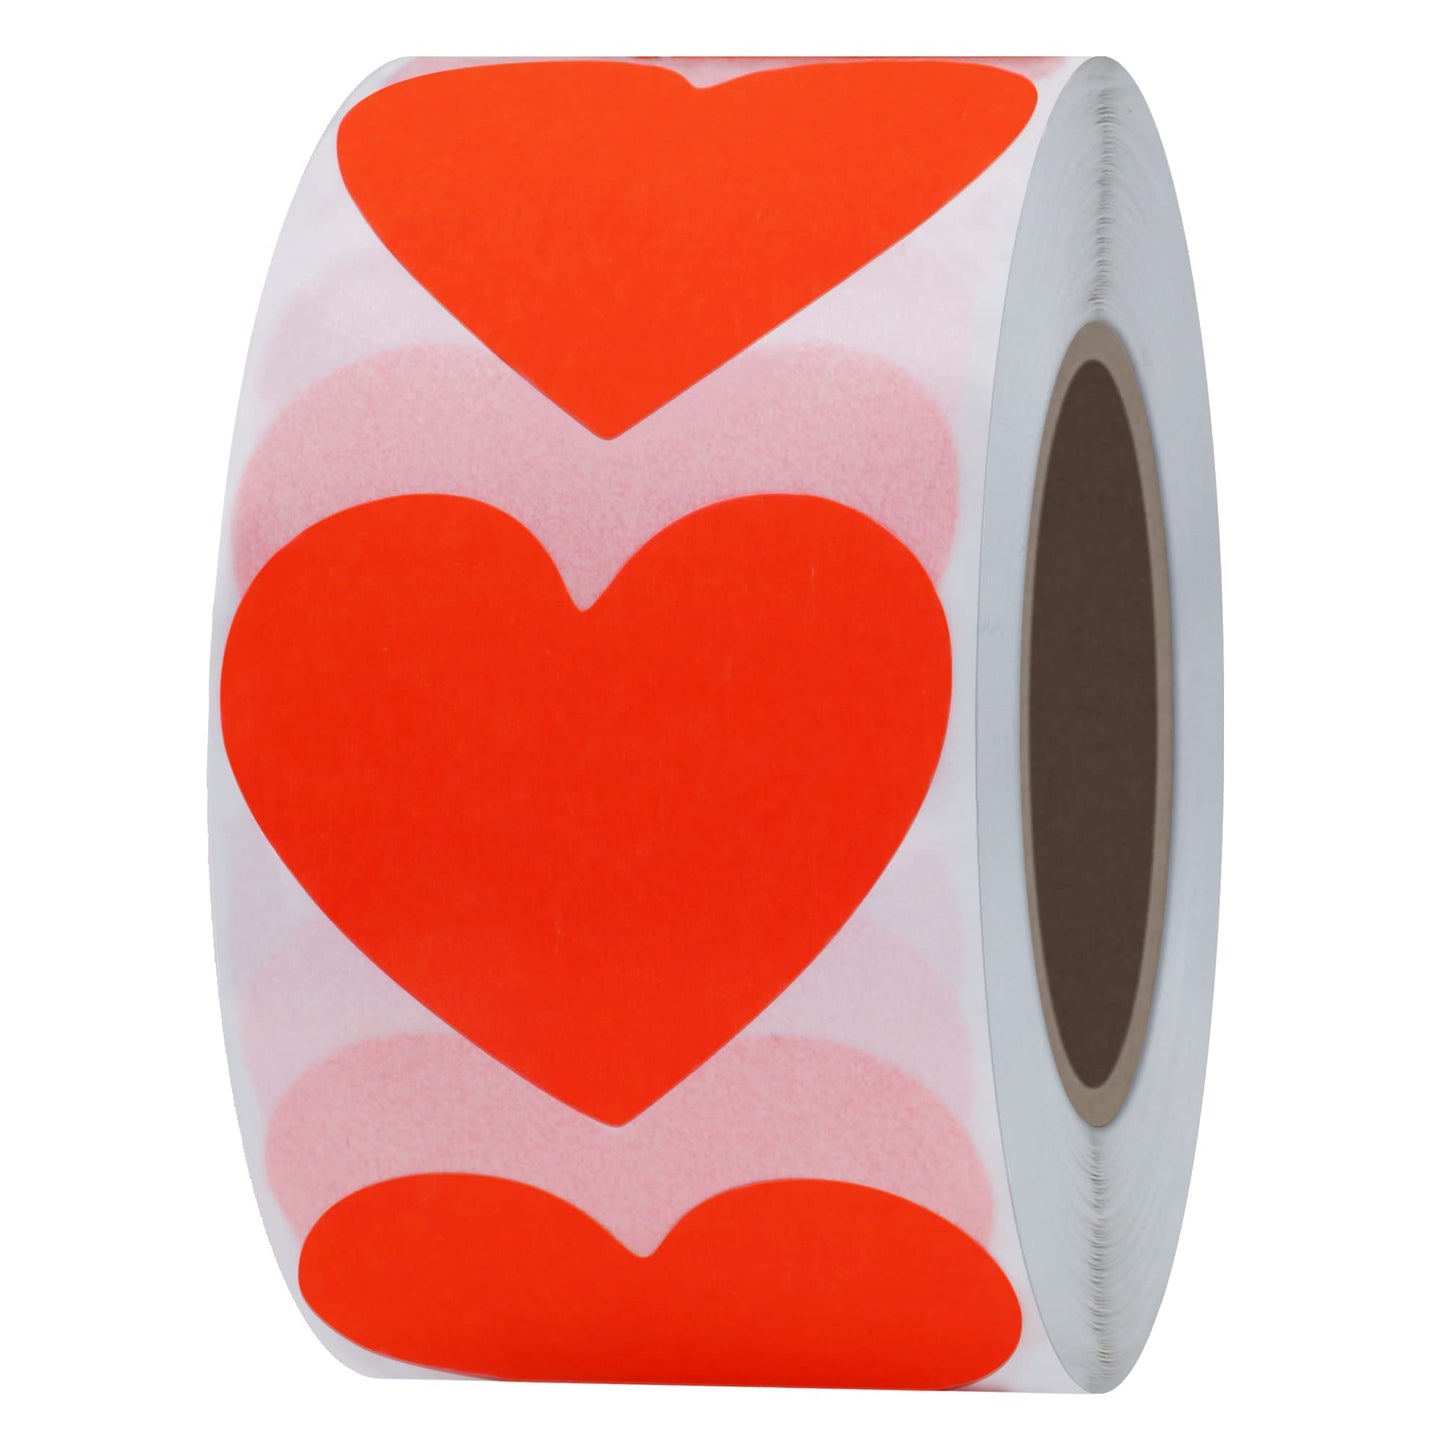 Hybsk Valentine's Day Heart Stickers Labels - Party Decorations Favors Gifts Supplies Total